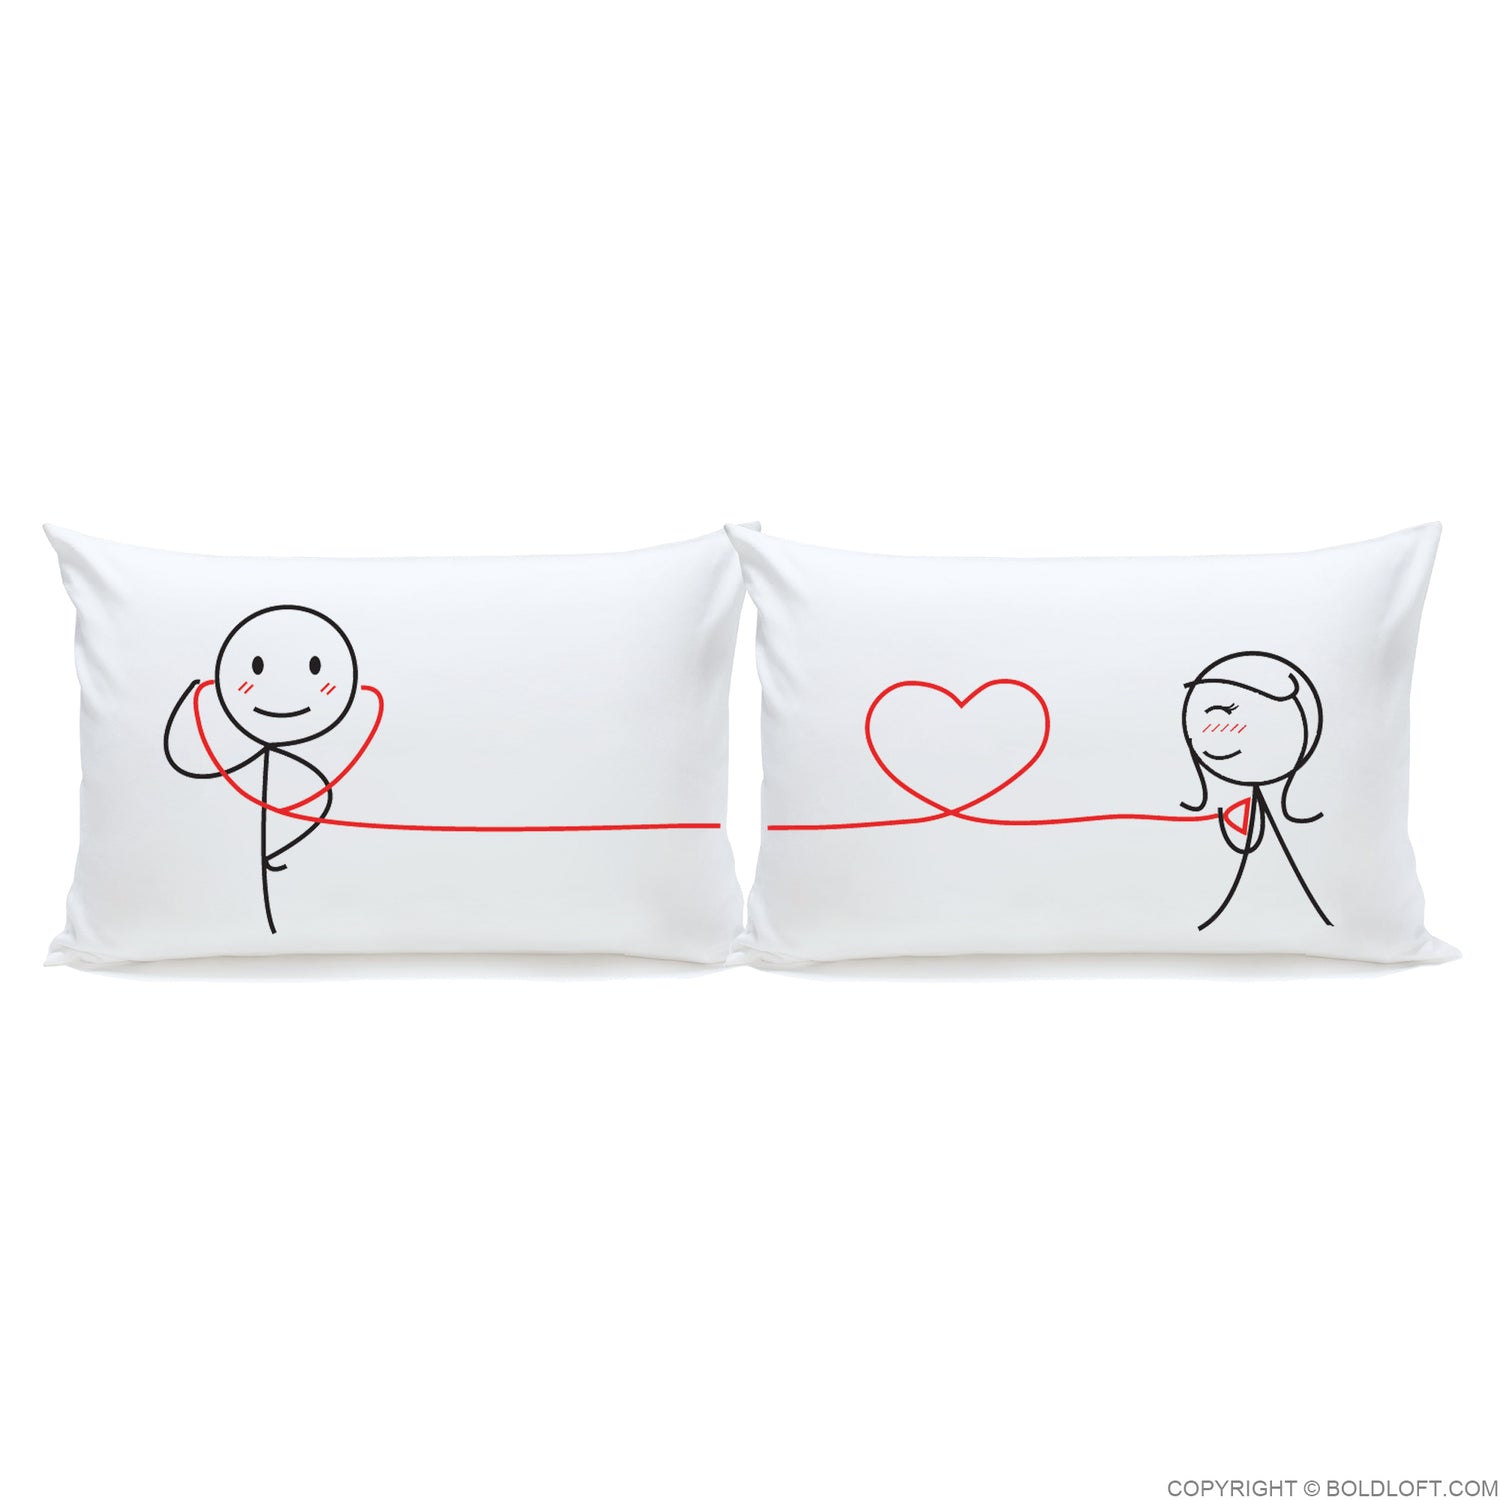 My Heart Beats For You™ Couples Pillowcases